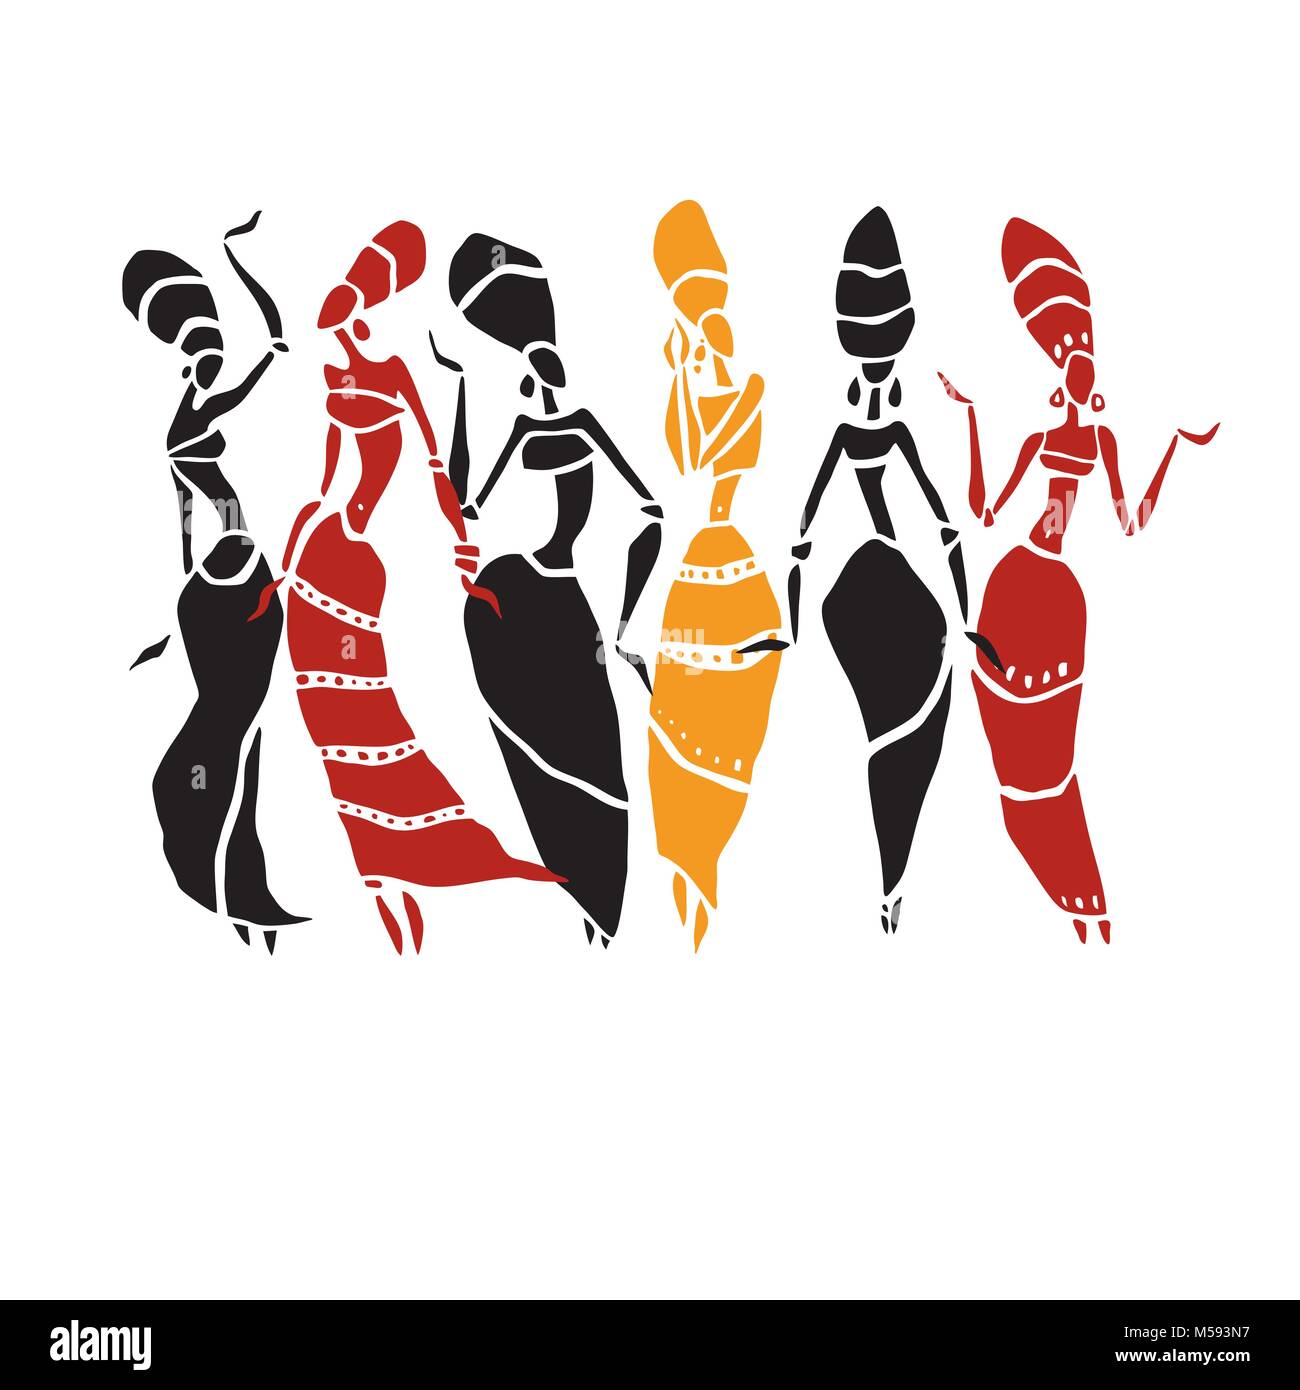 Zulu Dancers Cut Out Stock Images And Pictures Alamy 